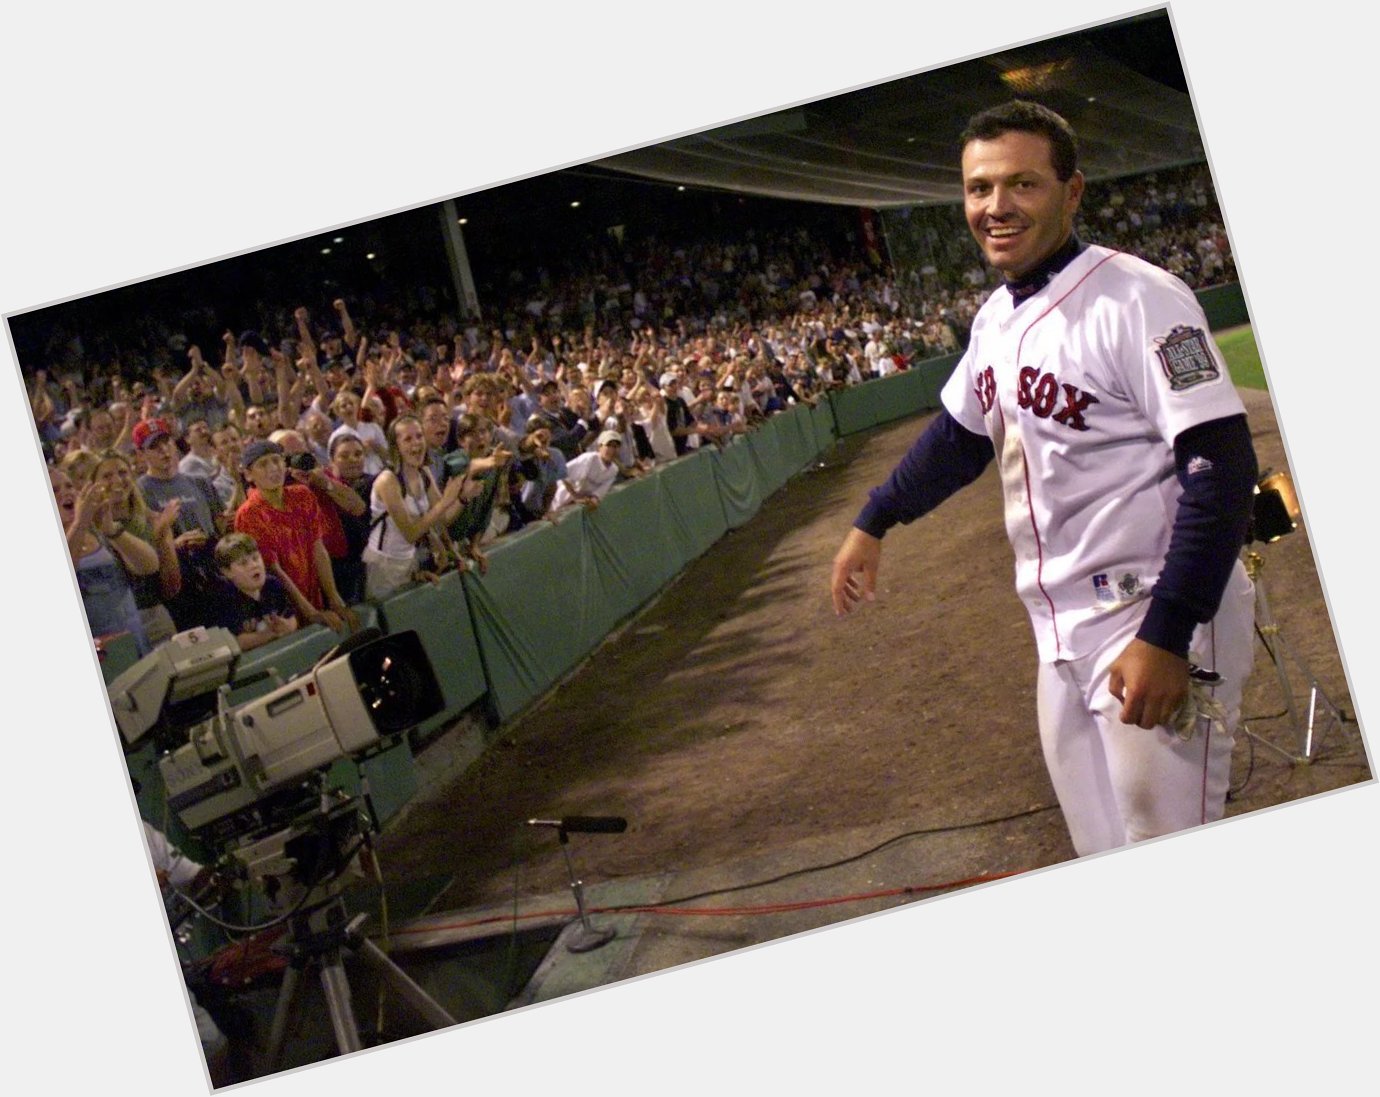 Happy birthday to Brian Daubach, who hit 86 homers for the Red Sox, including 2 for the 2004 squad 